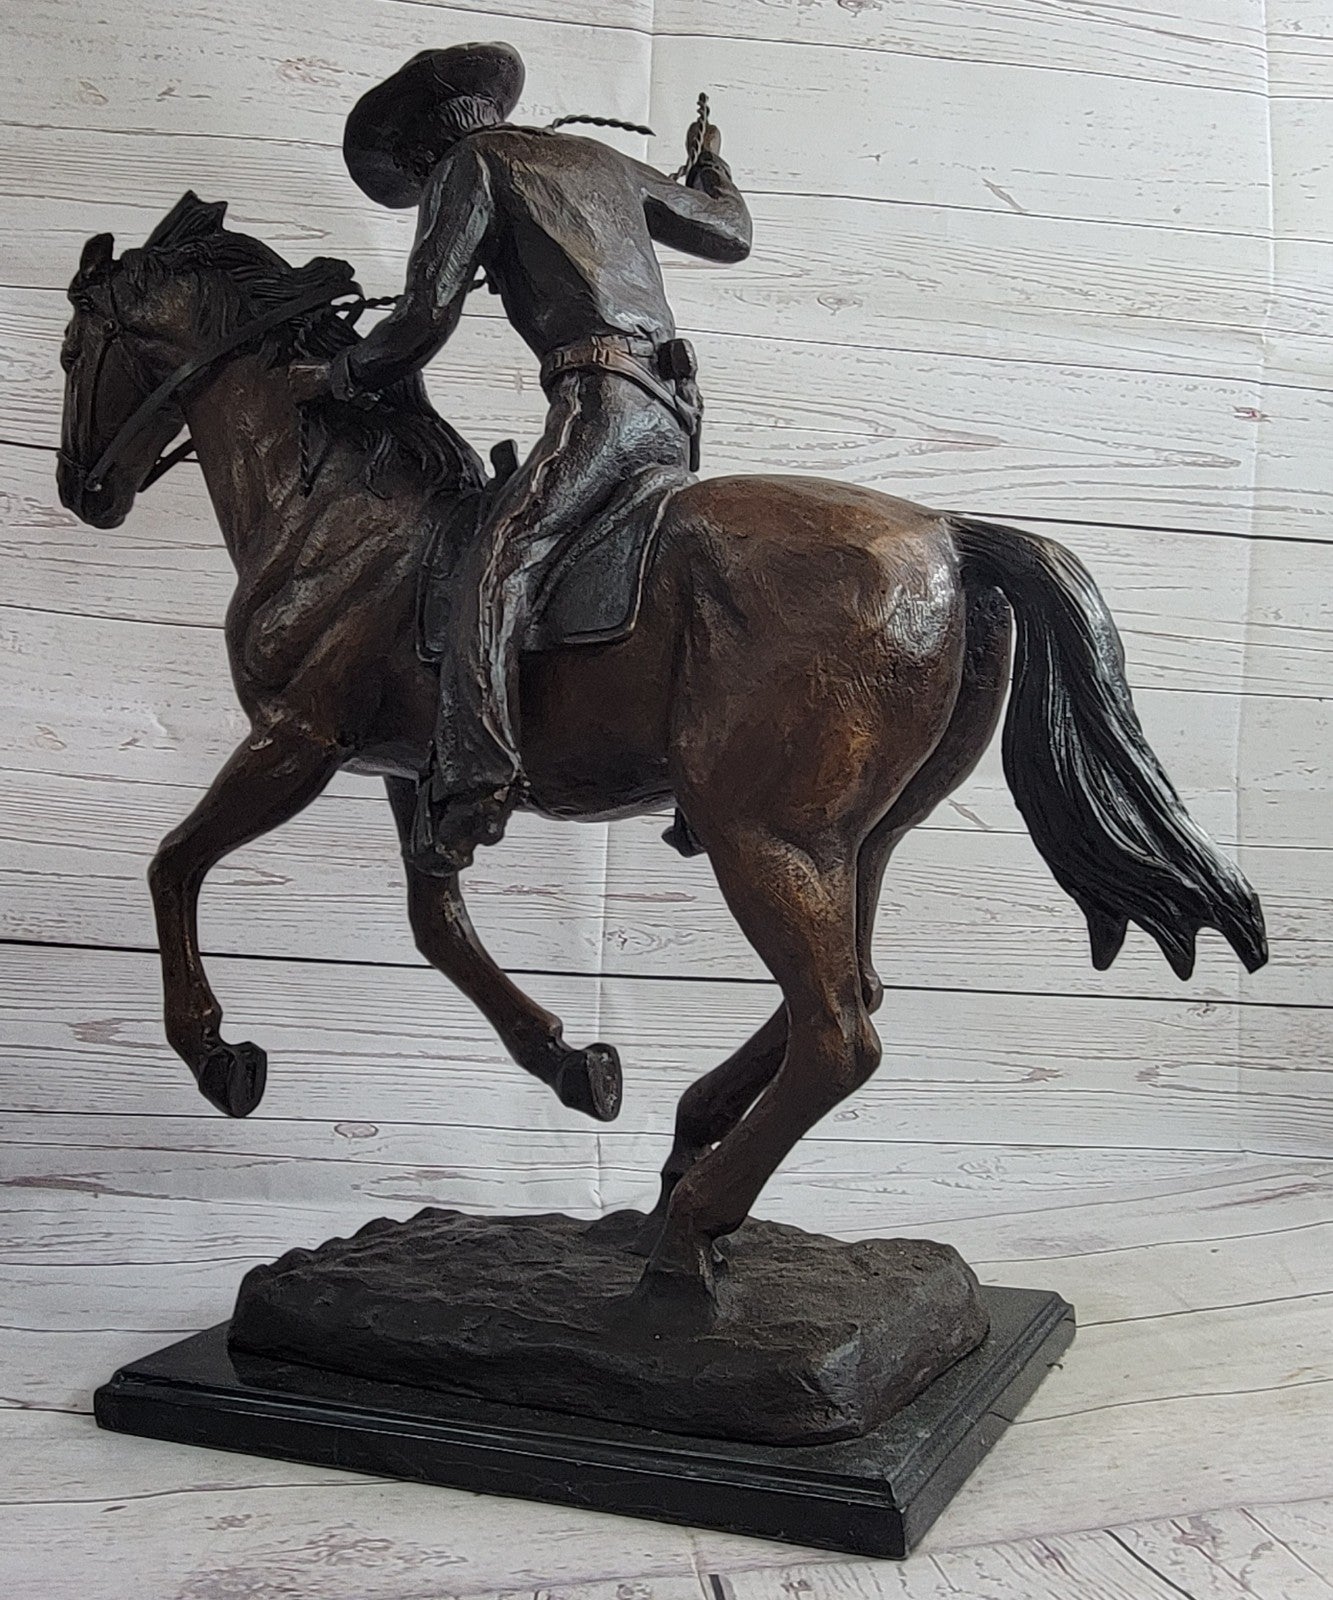 Old School Hot Cast Western Cowboy with His Horse Bronze Sculpture Marble Base